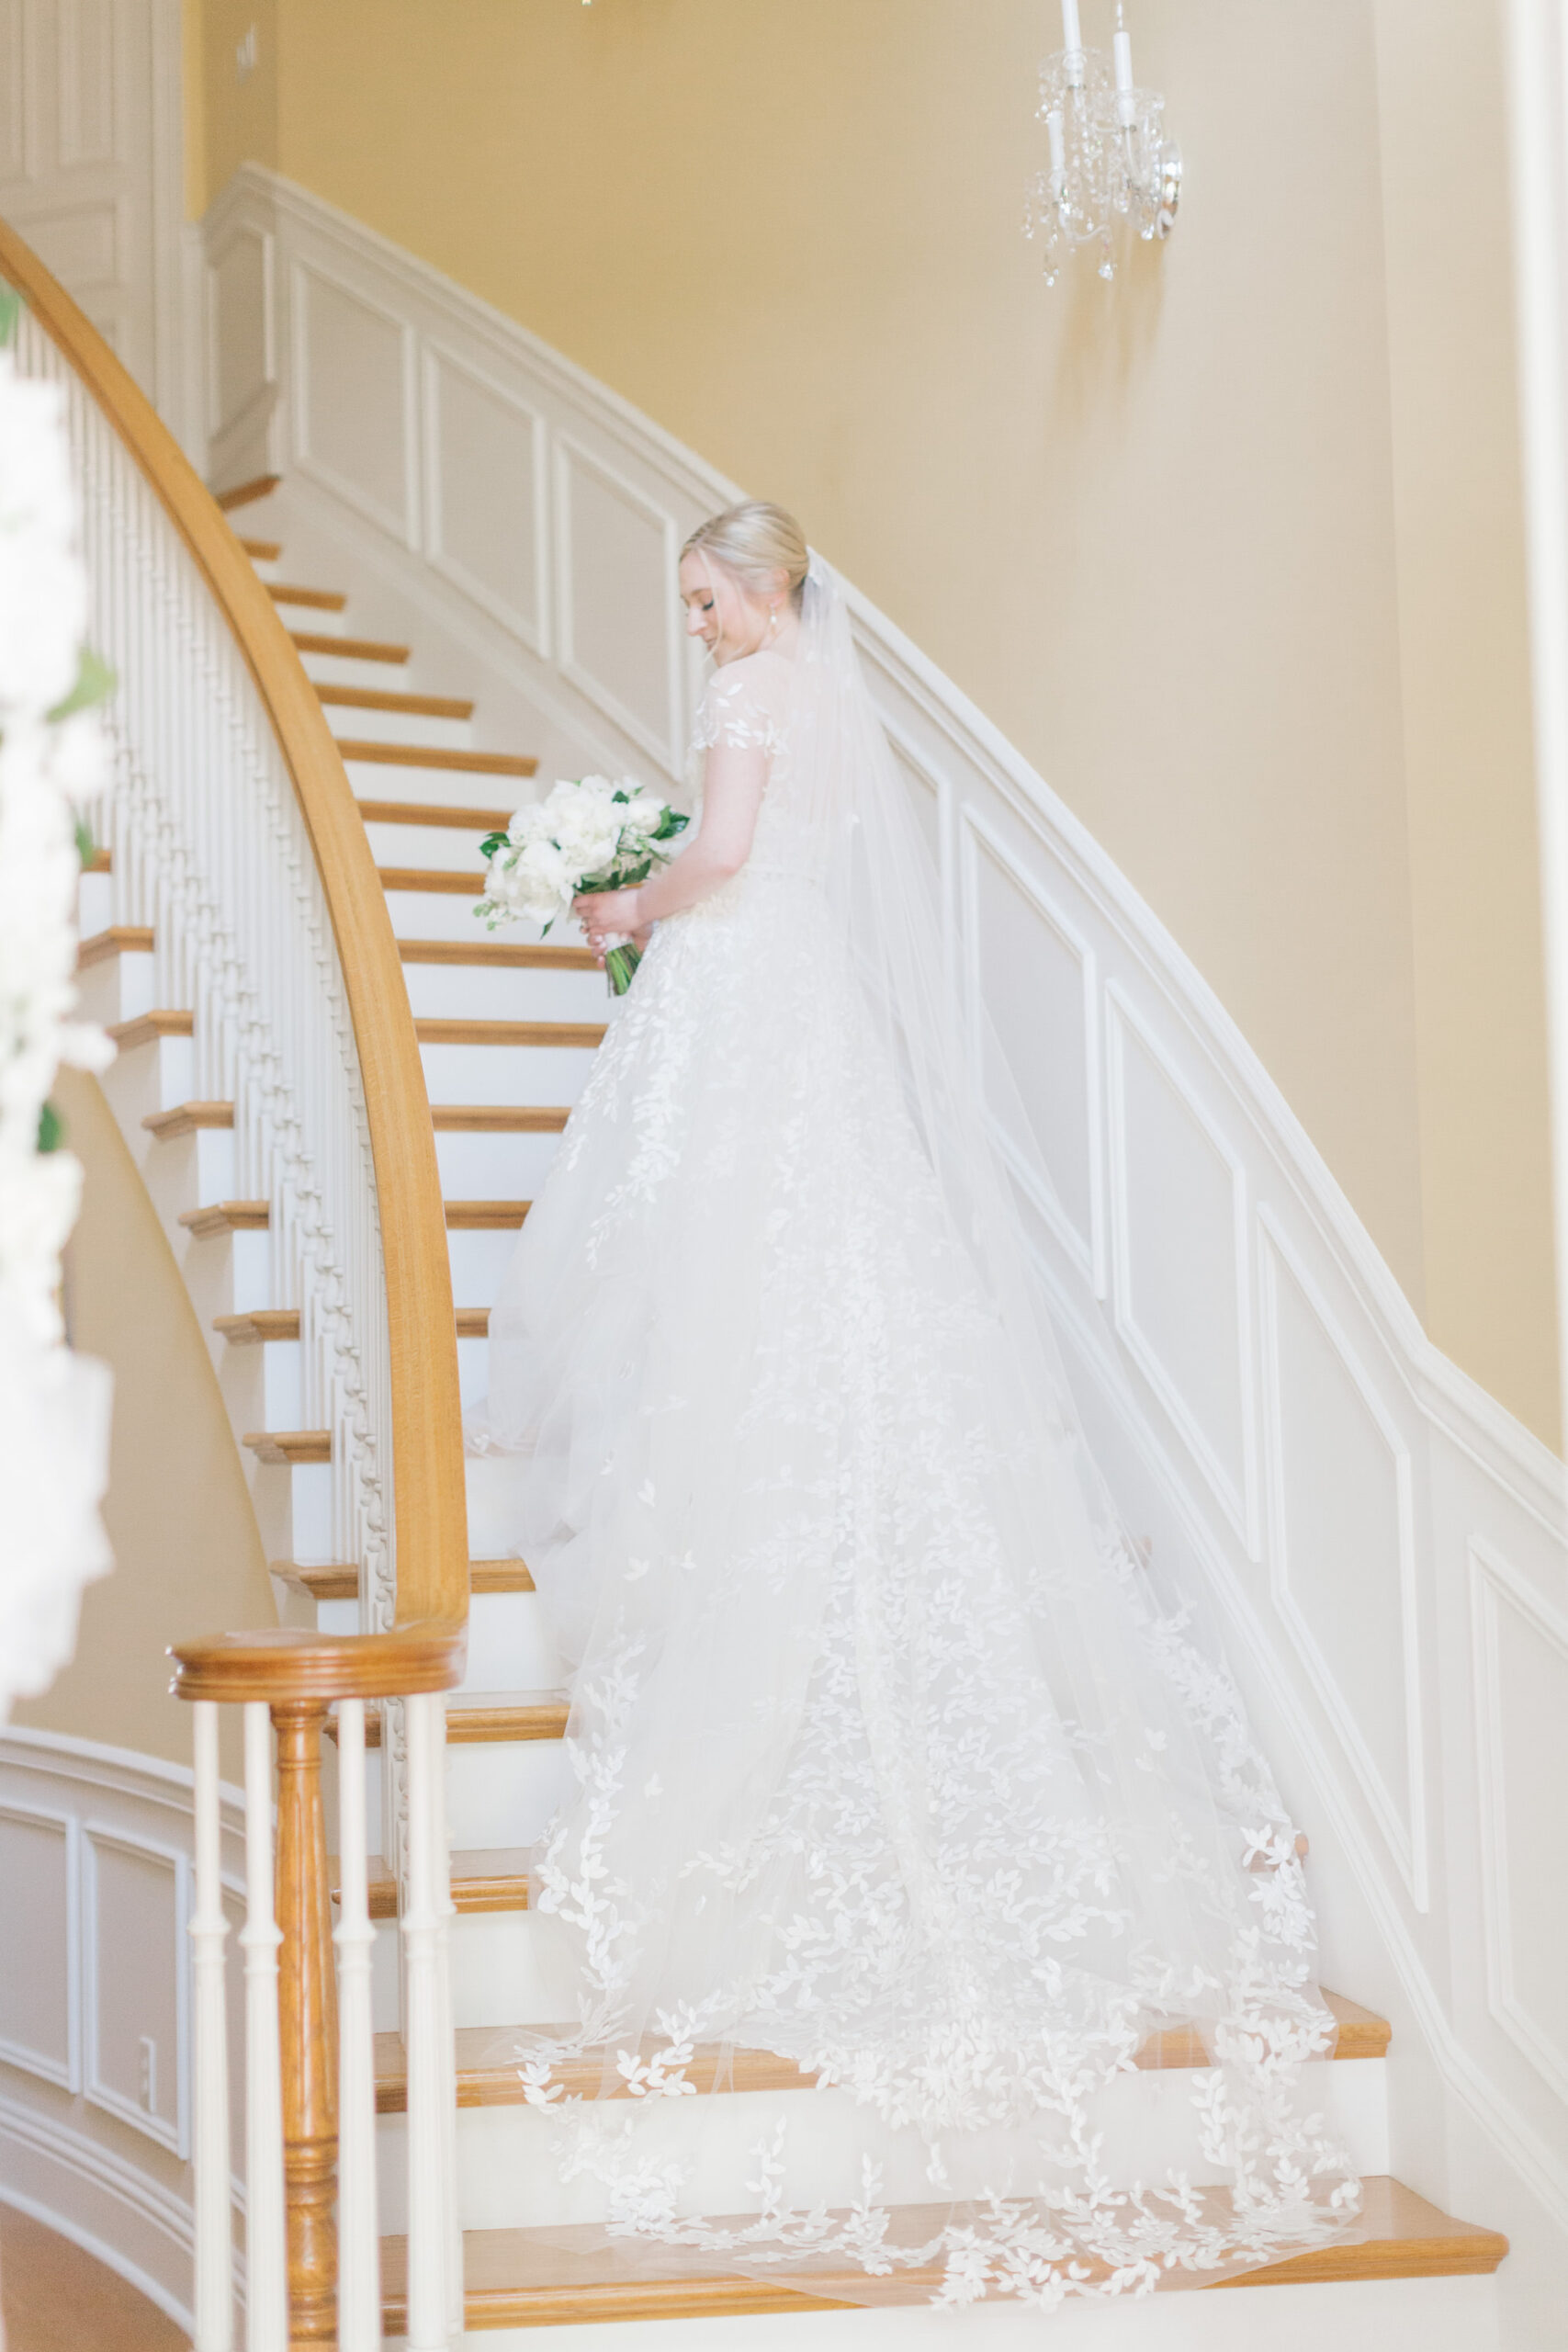 Timeless A-Line Wedding Dress with Lace Petal Appliques and Chapel Length Train Inspiration